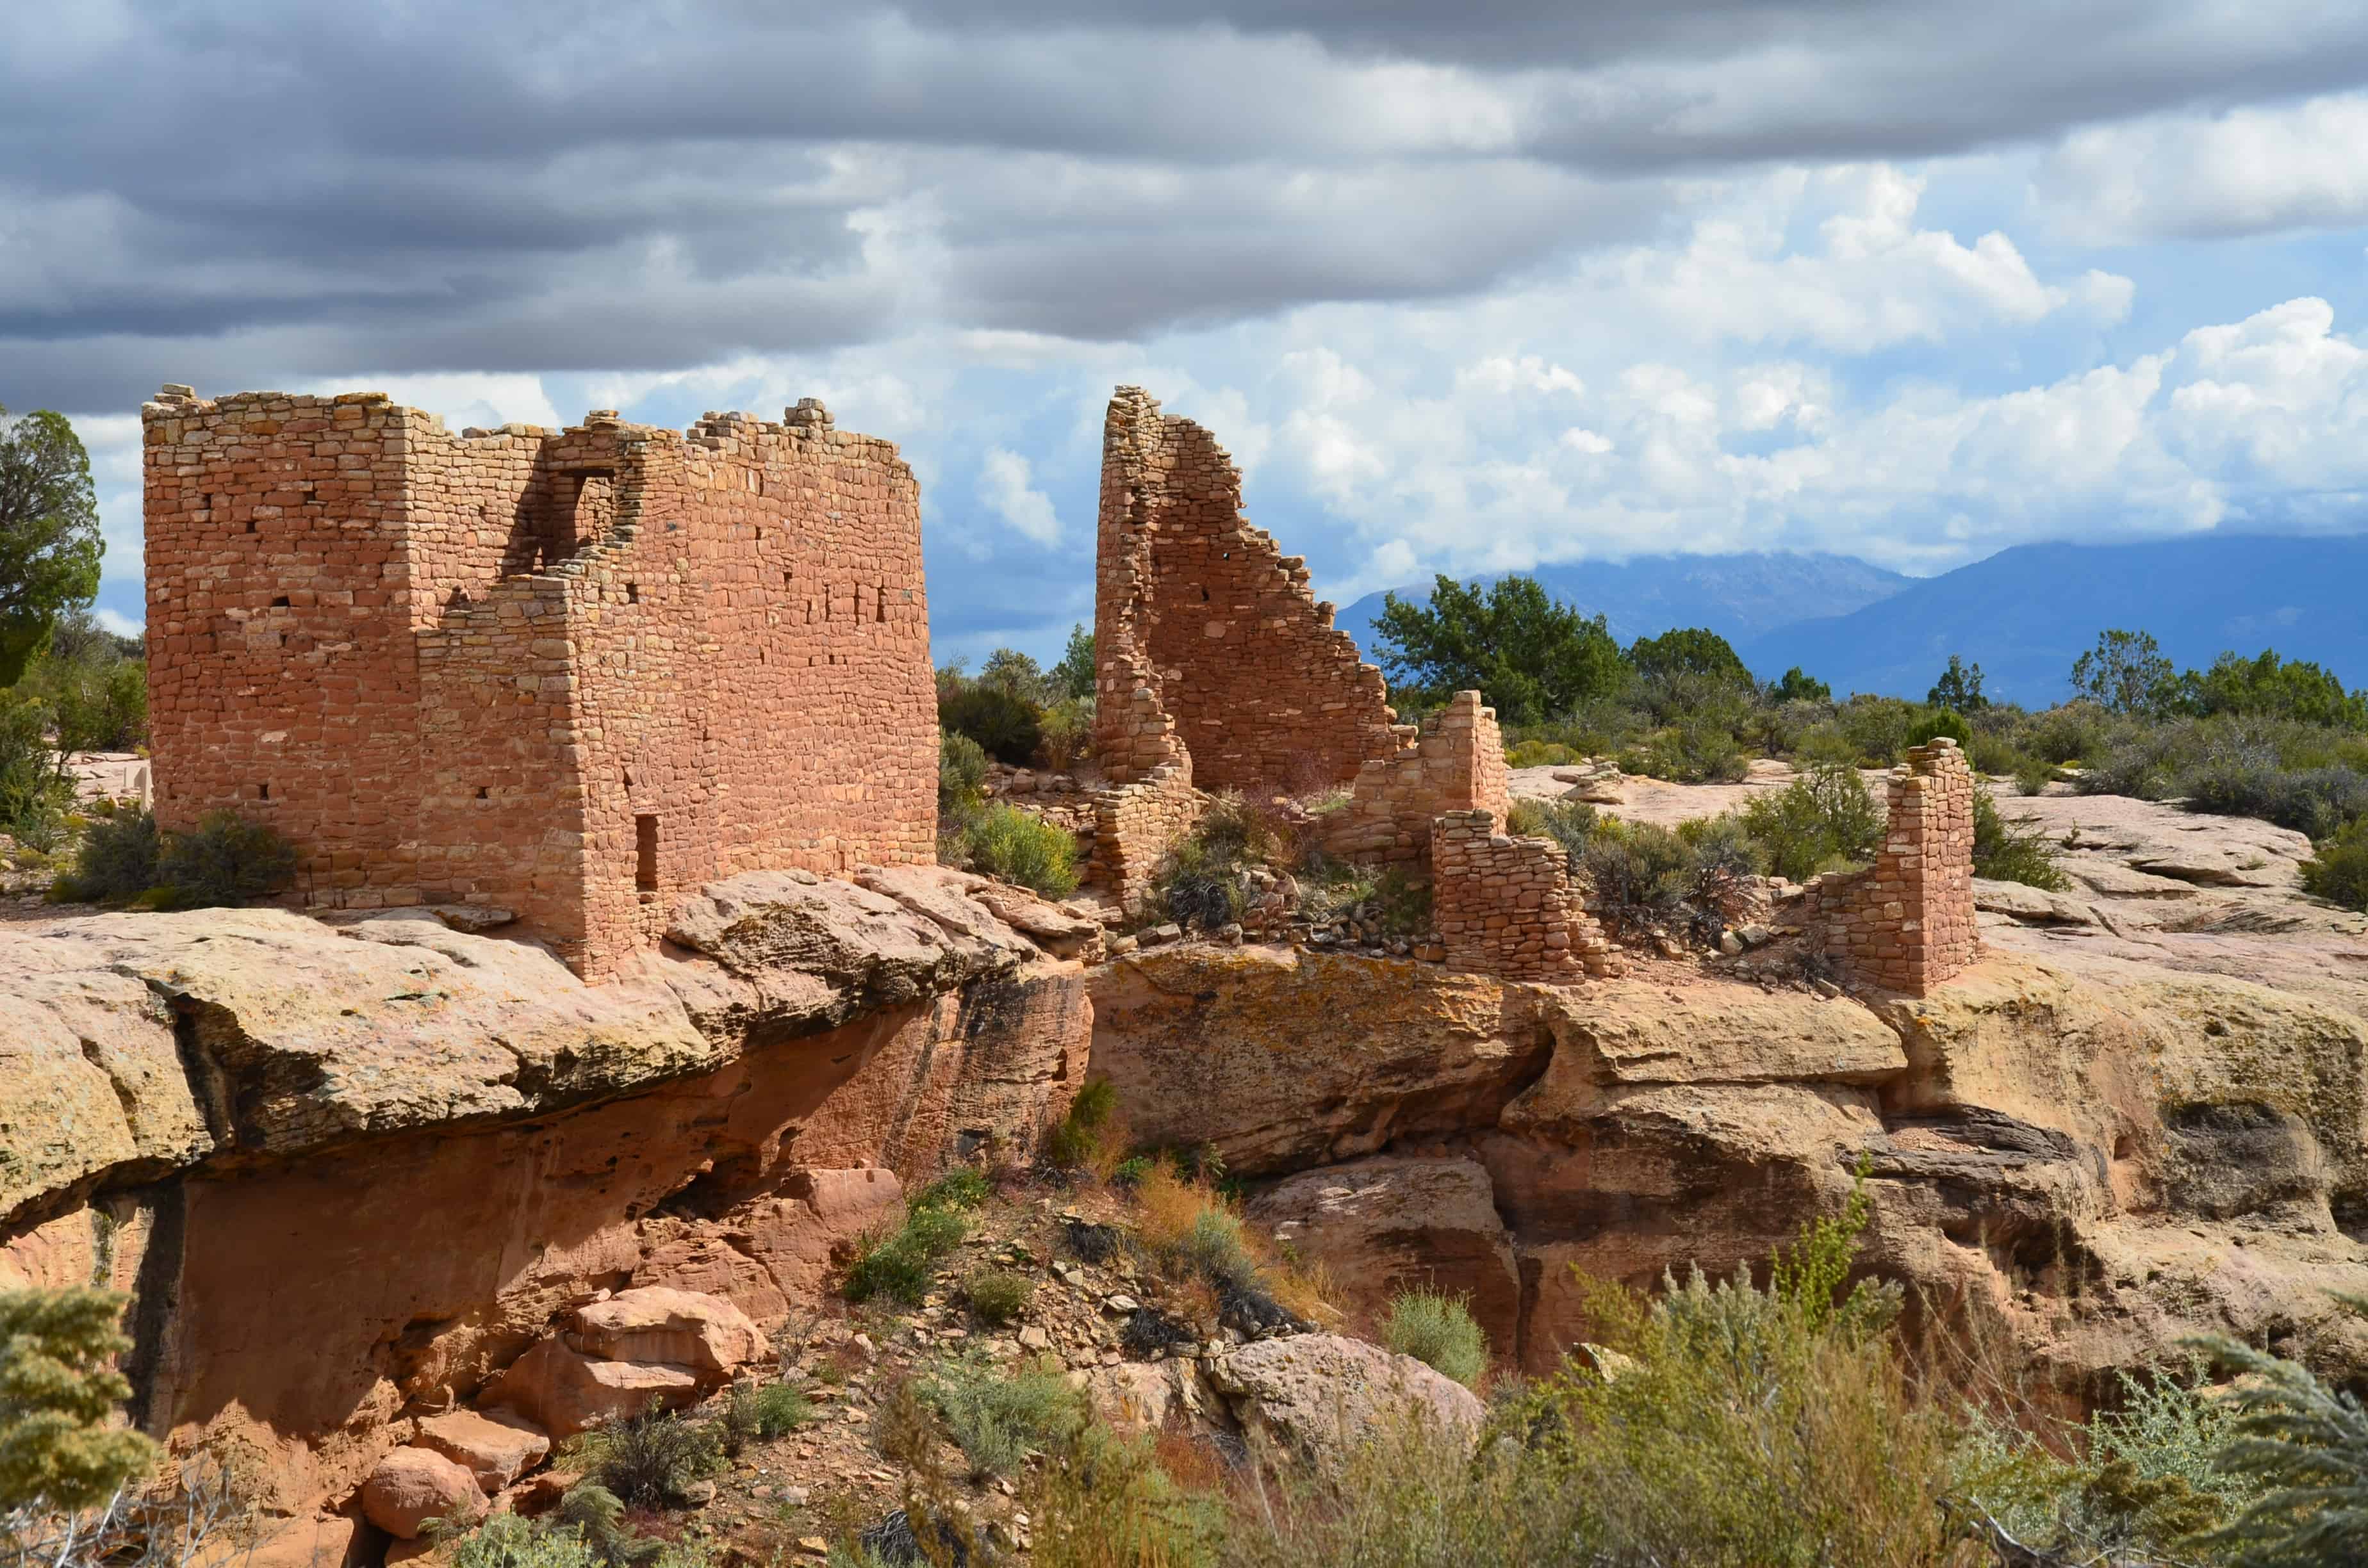 Hovenweep Castle at Hovenweep National Monument in Utah